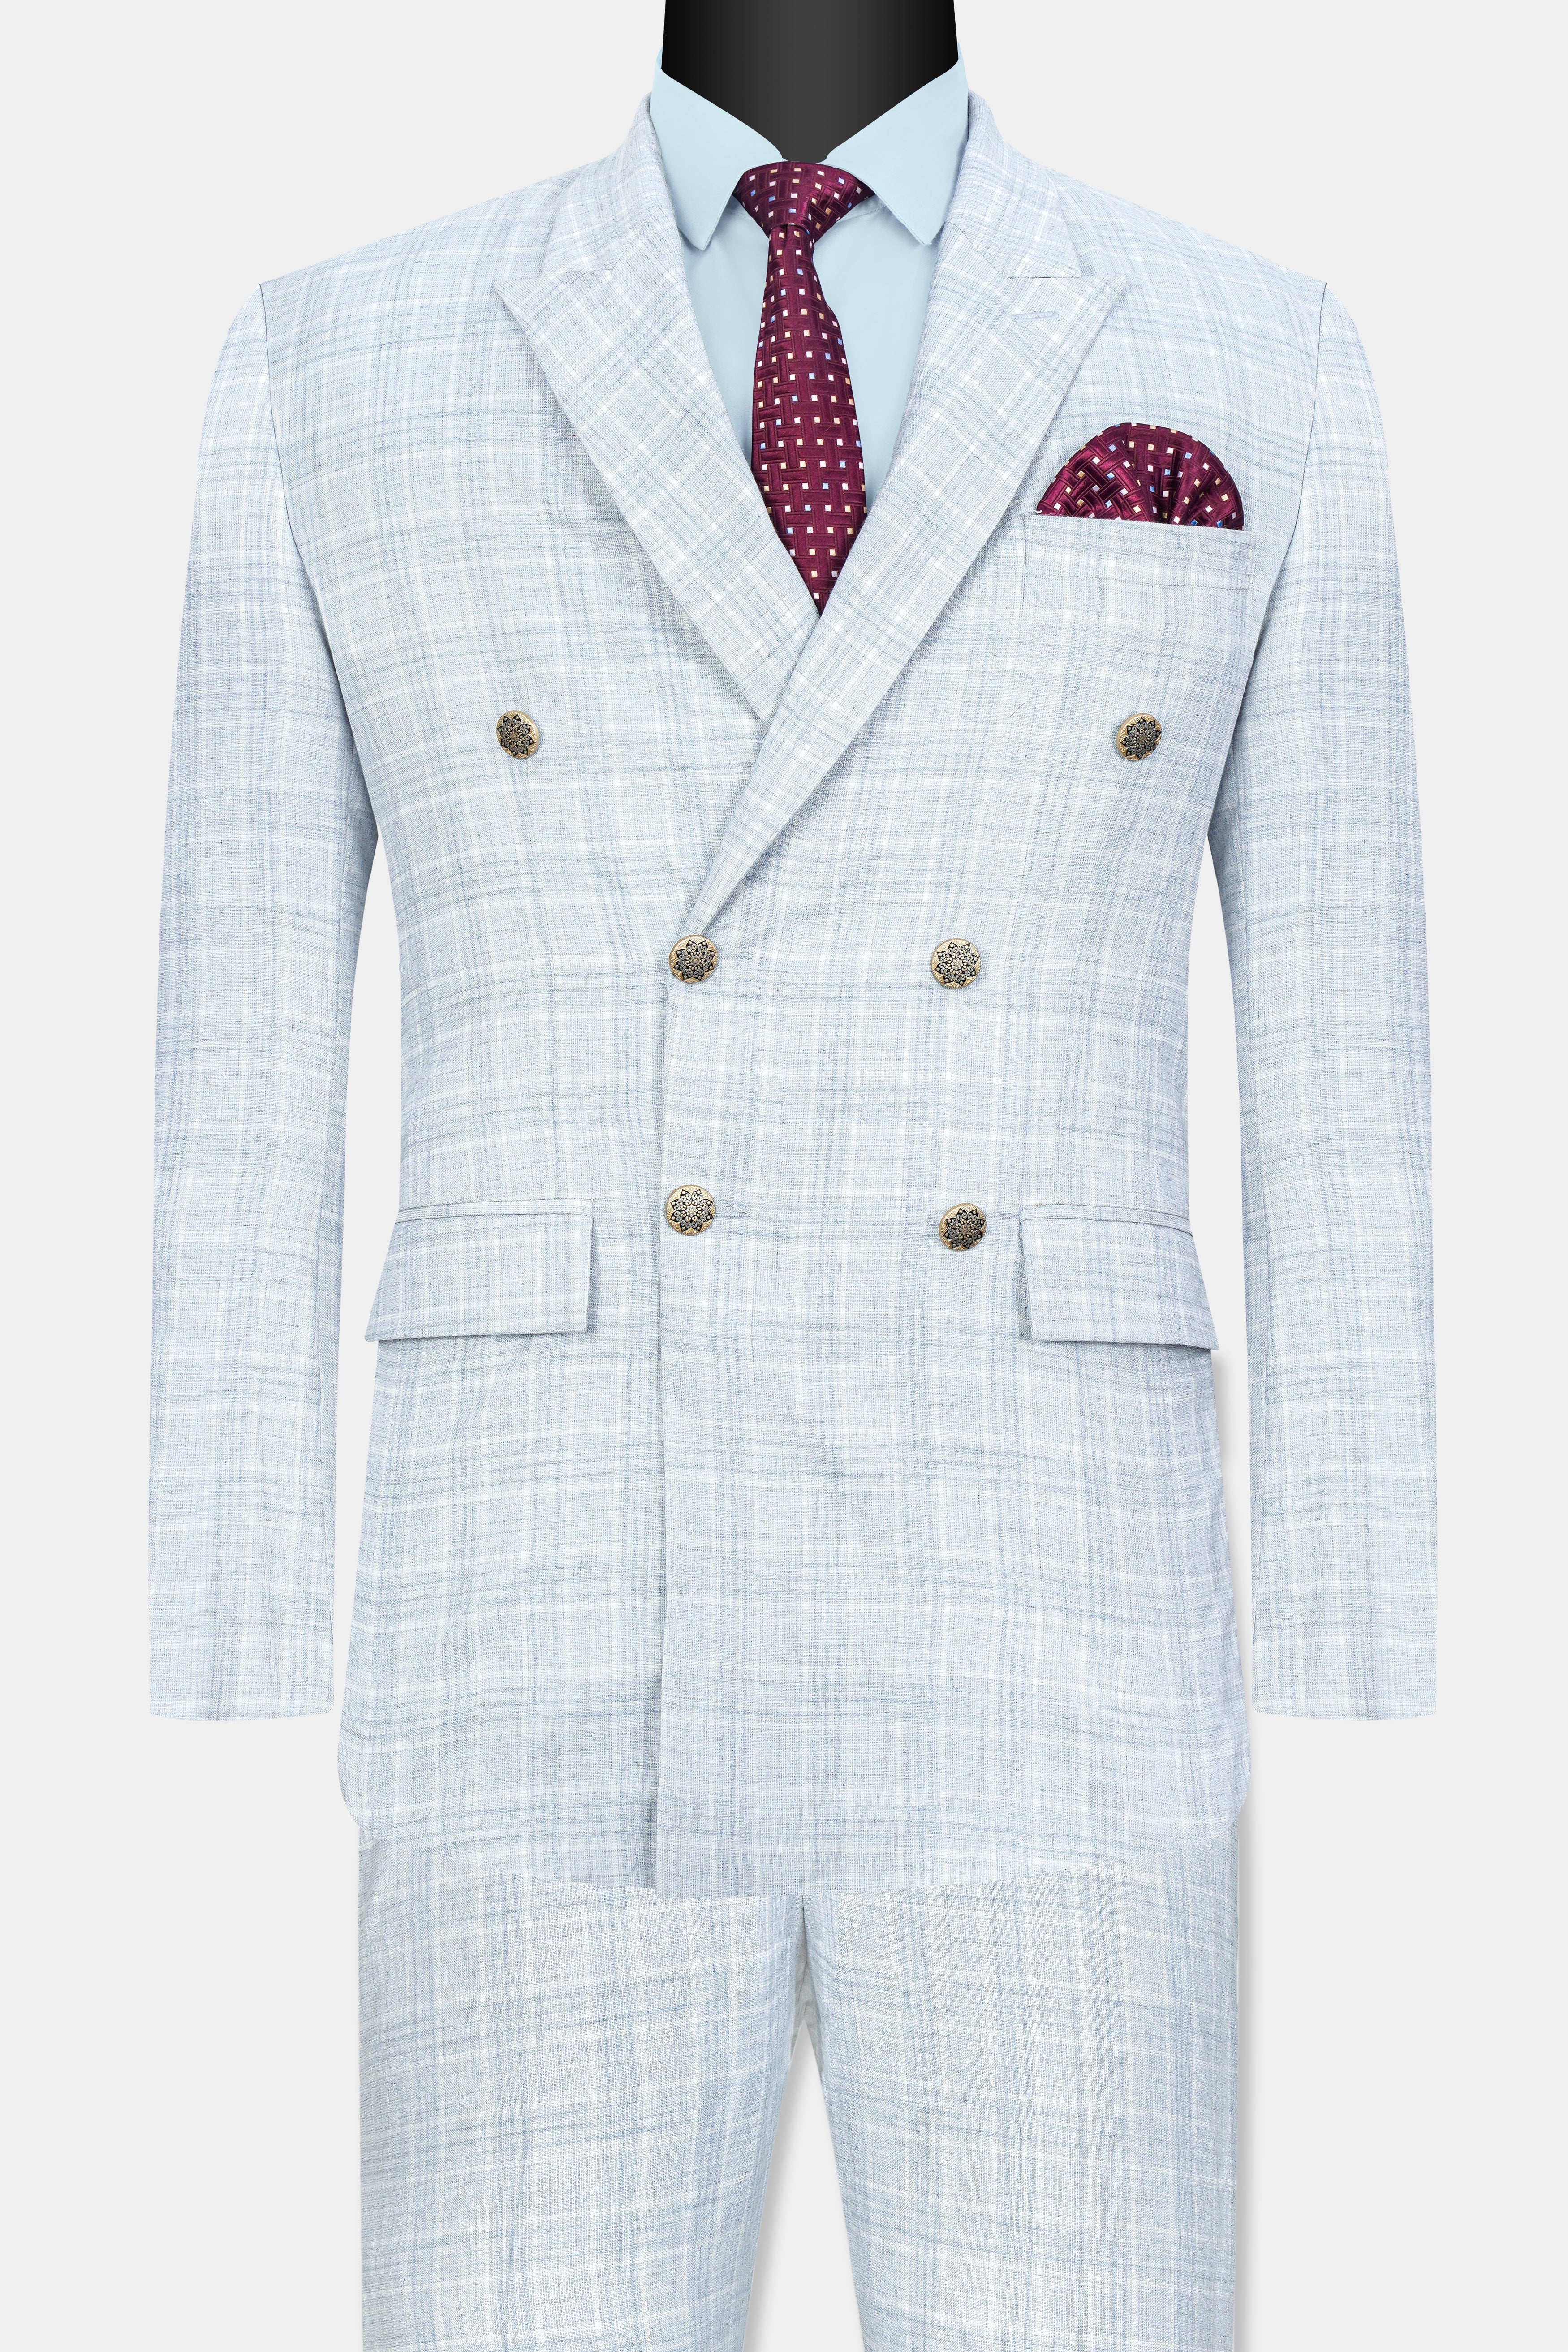 Gainsboro Blue Plaid Wool Rich Double Breasted Suit ST3076-DB-GB-36, ST3076-DB-GB-38, ST3076-DB-GB-40, ST3076-DB-GB-42, ST3076-DB-GB-44, ST3076-DB-GB-46, ST3076-DB-GB-48, ST3076-DB-GB-50, ST3076-DB-GB-52, ST3076-DB-GB-54, ST3076-DB-GB-56, ST3076-DB-GB-58, ST3076-DB-GB-60